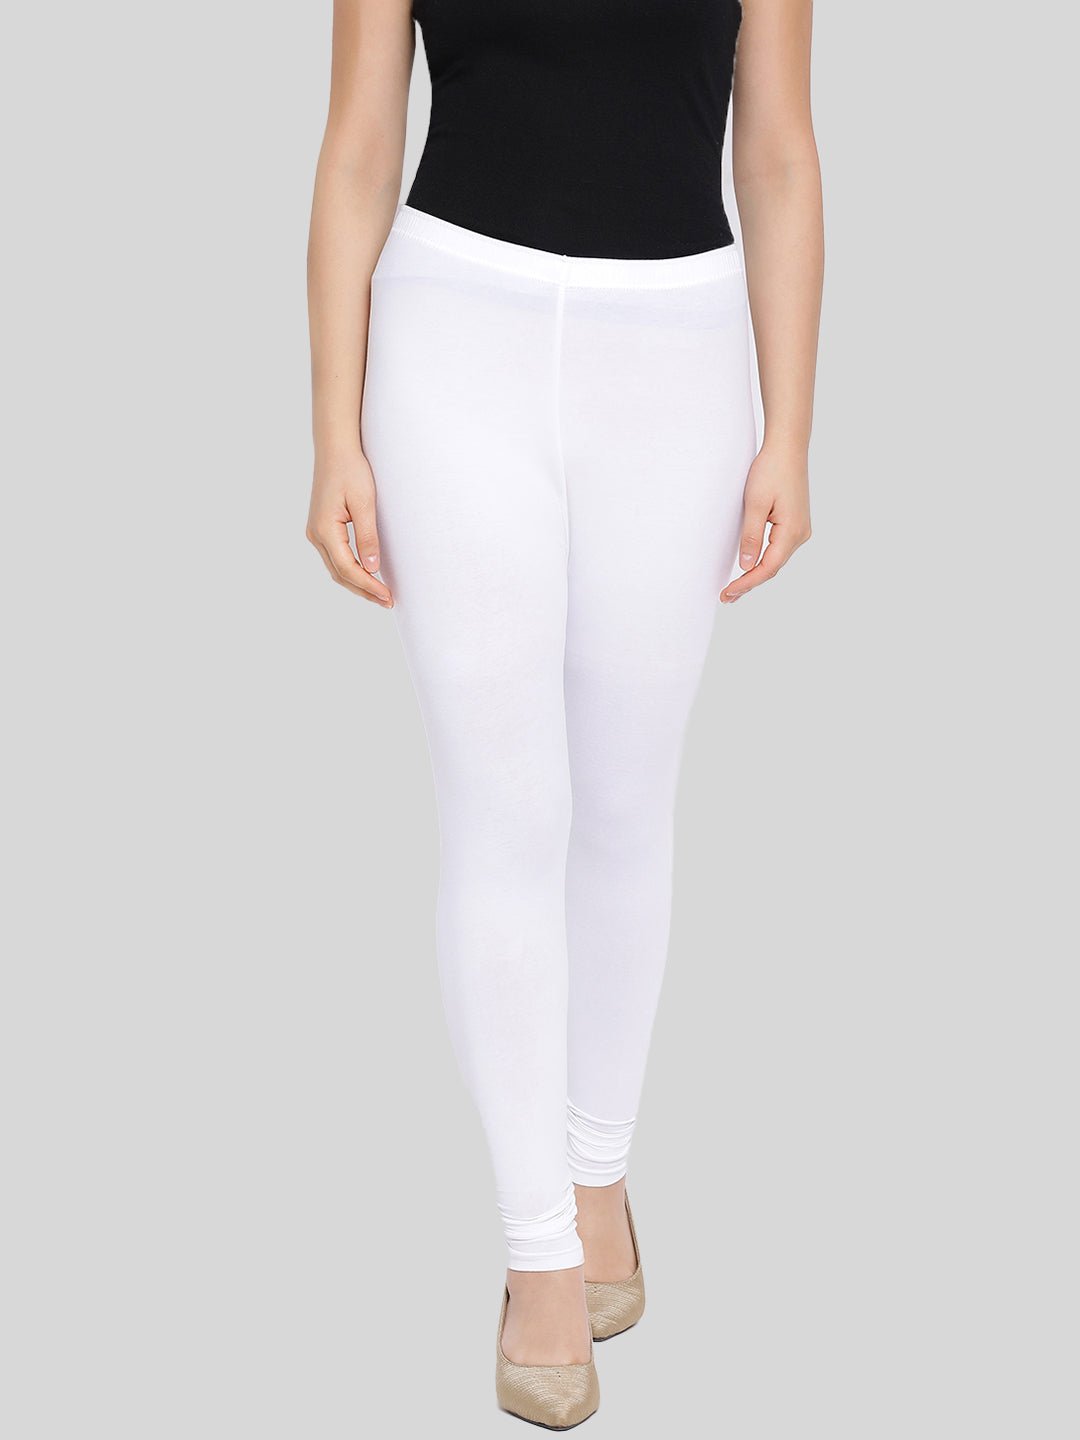 Lux Lyra Leggings Wholesale Price In Delhivery | International Society of  Precision Agriculture